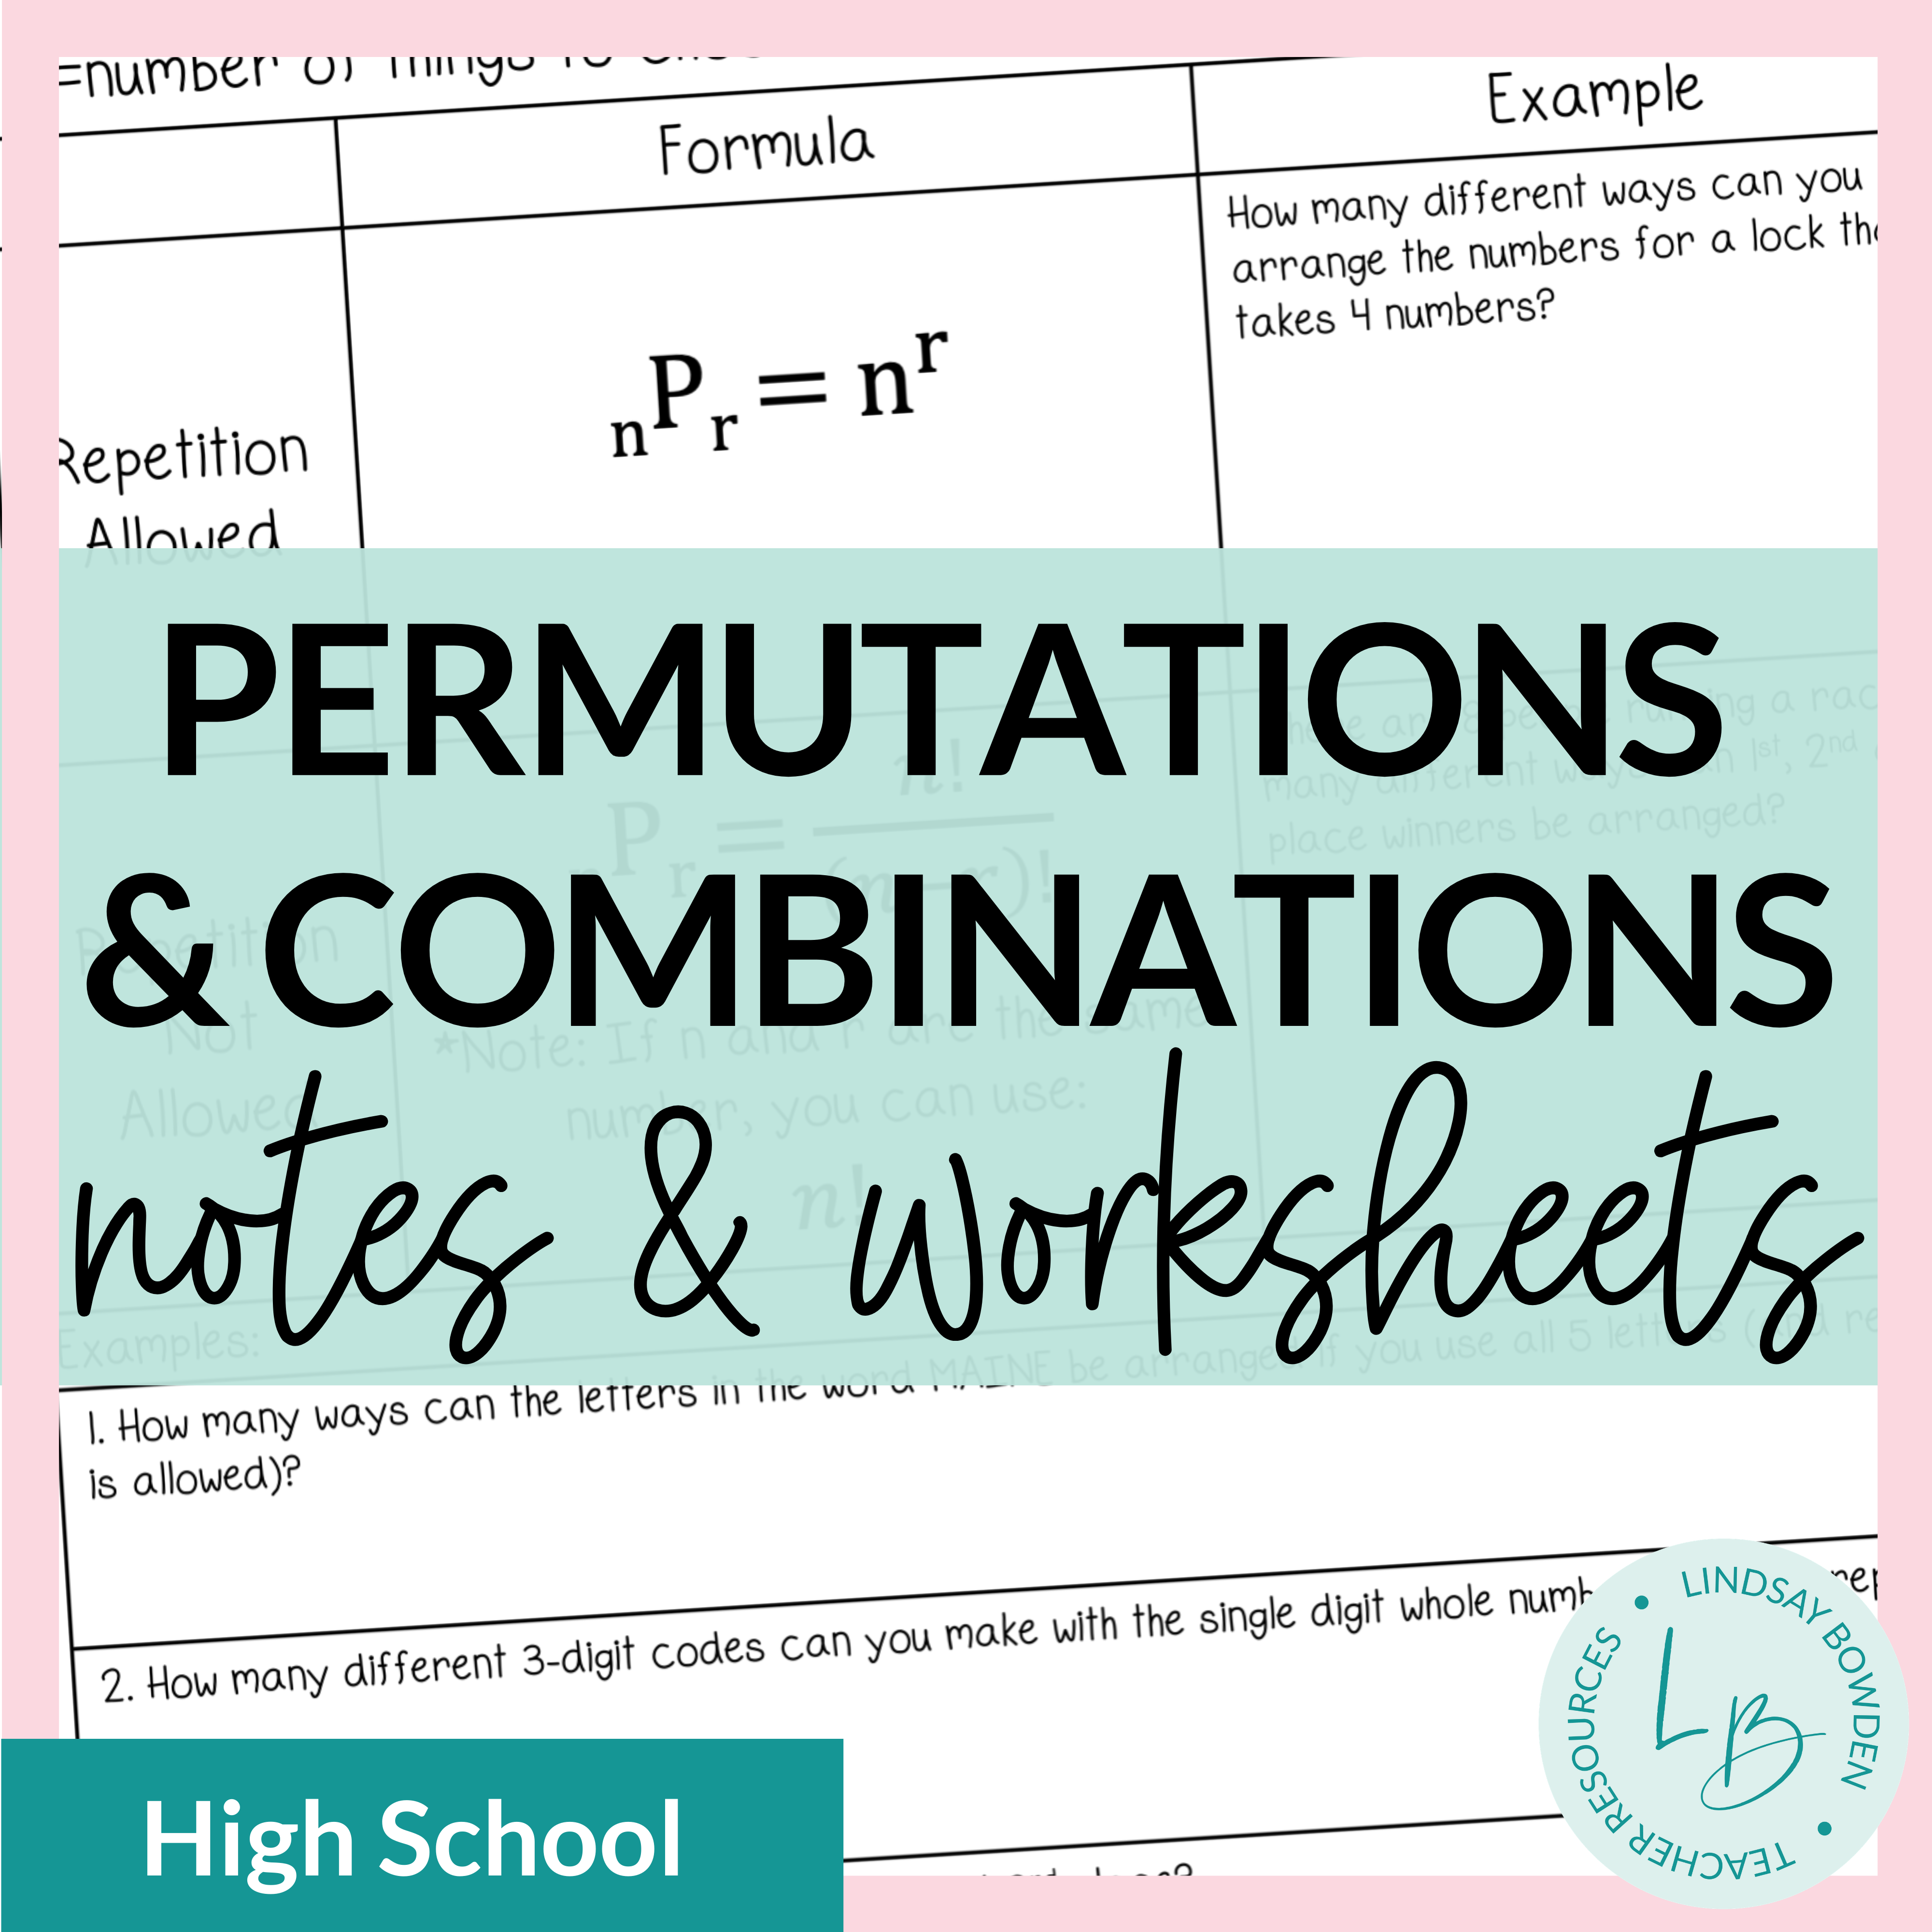 permutations-and-combinations-notes-and-worksheets-lindsay-bowden